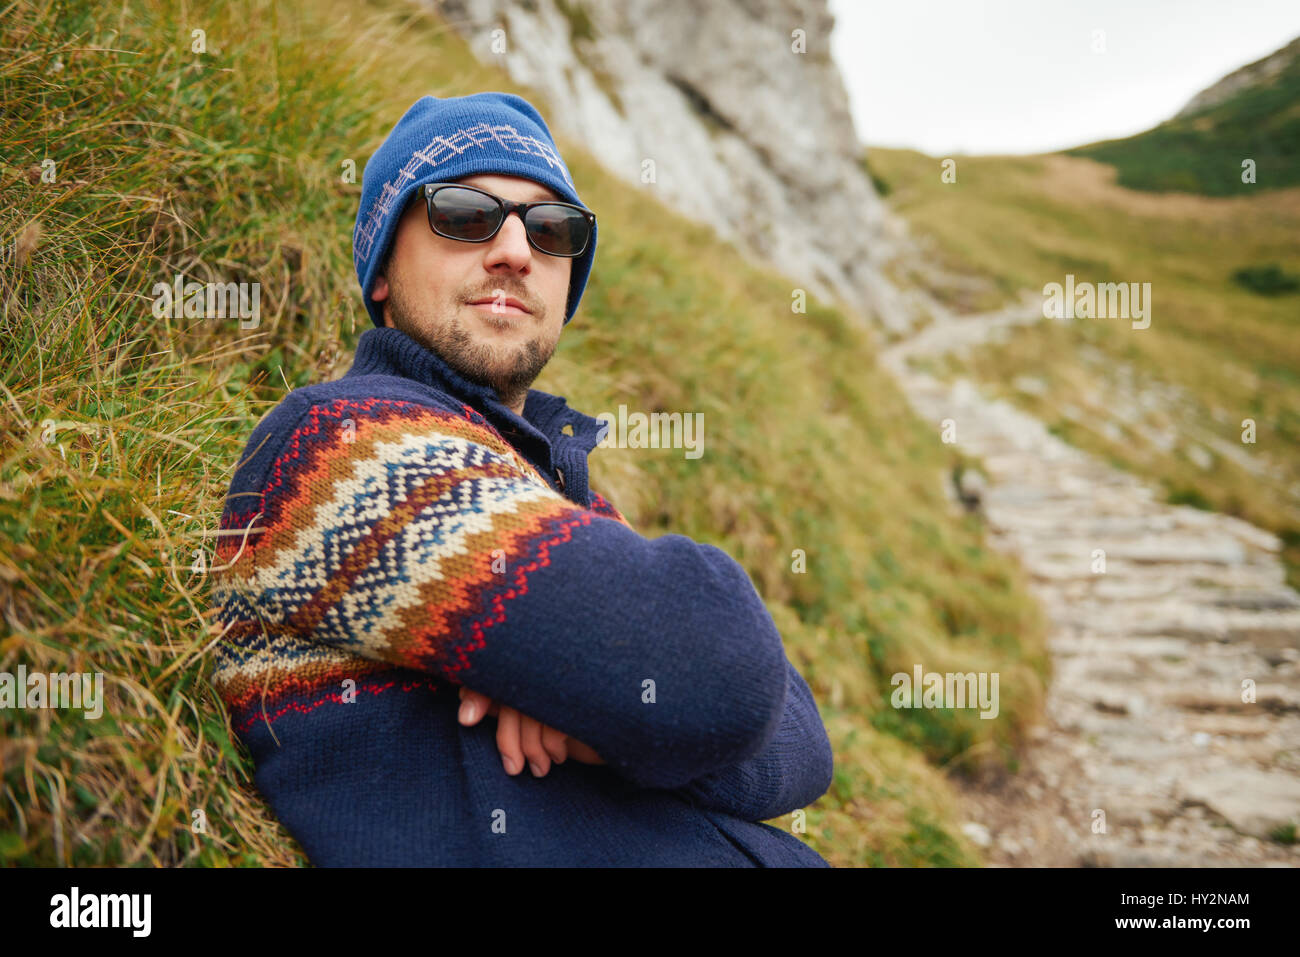 Hiker looking cool on a rugged mountain trail Stock Photo